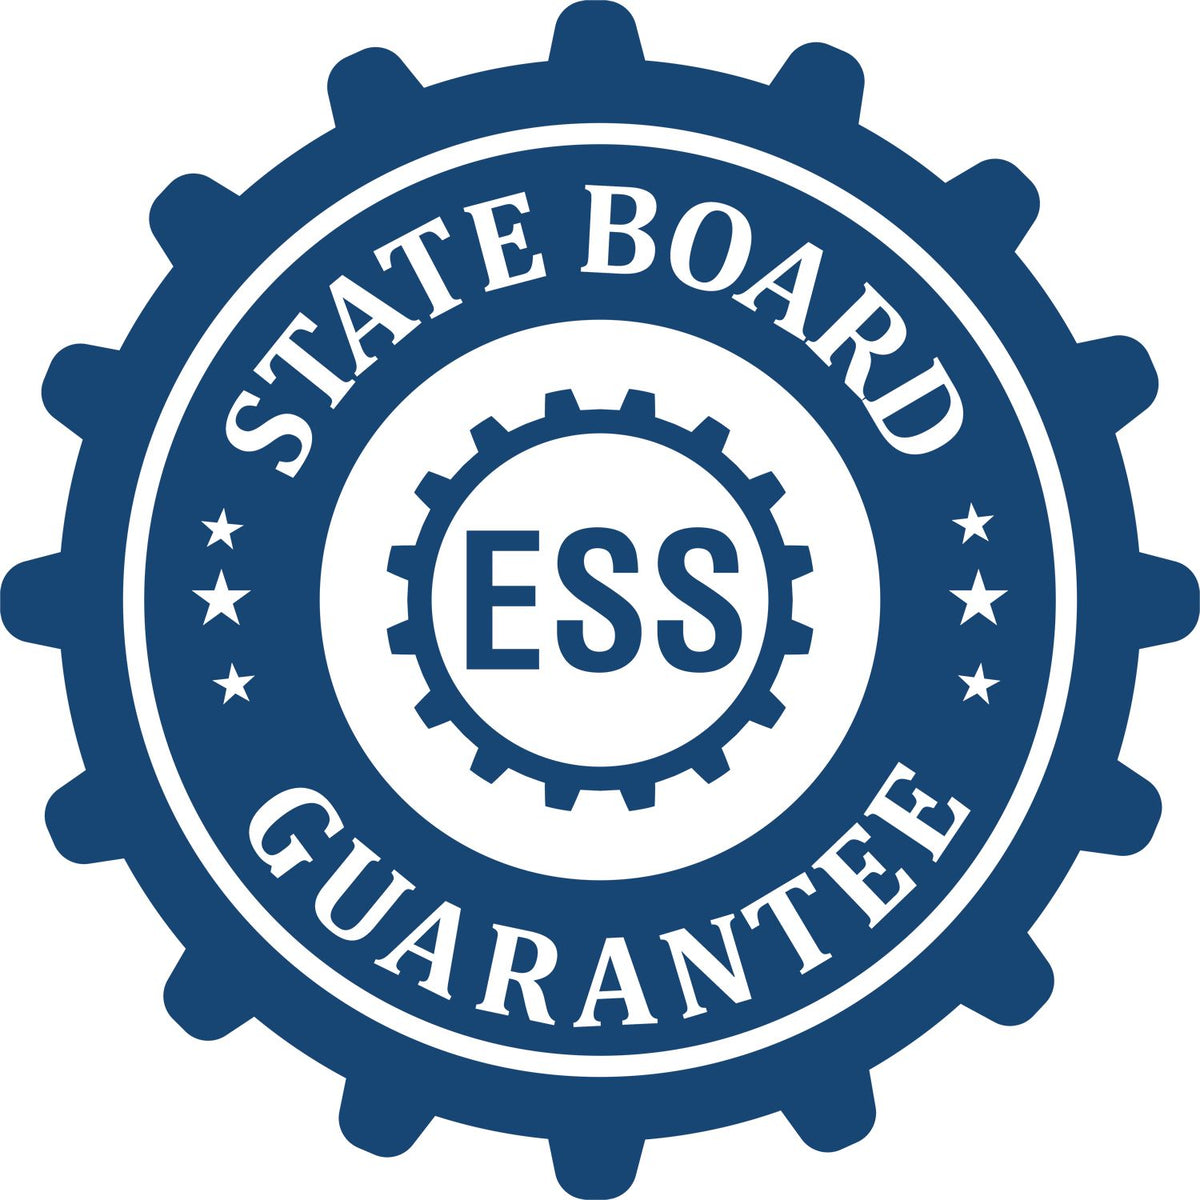 An emblem in a gear shape illustrating a state board guarantee for the Hybrid Alabama Landscape Architect Seal